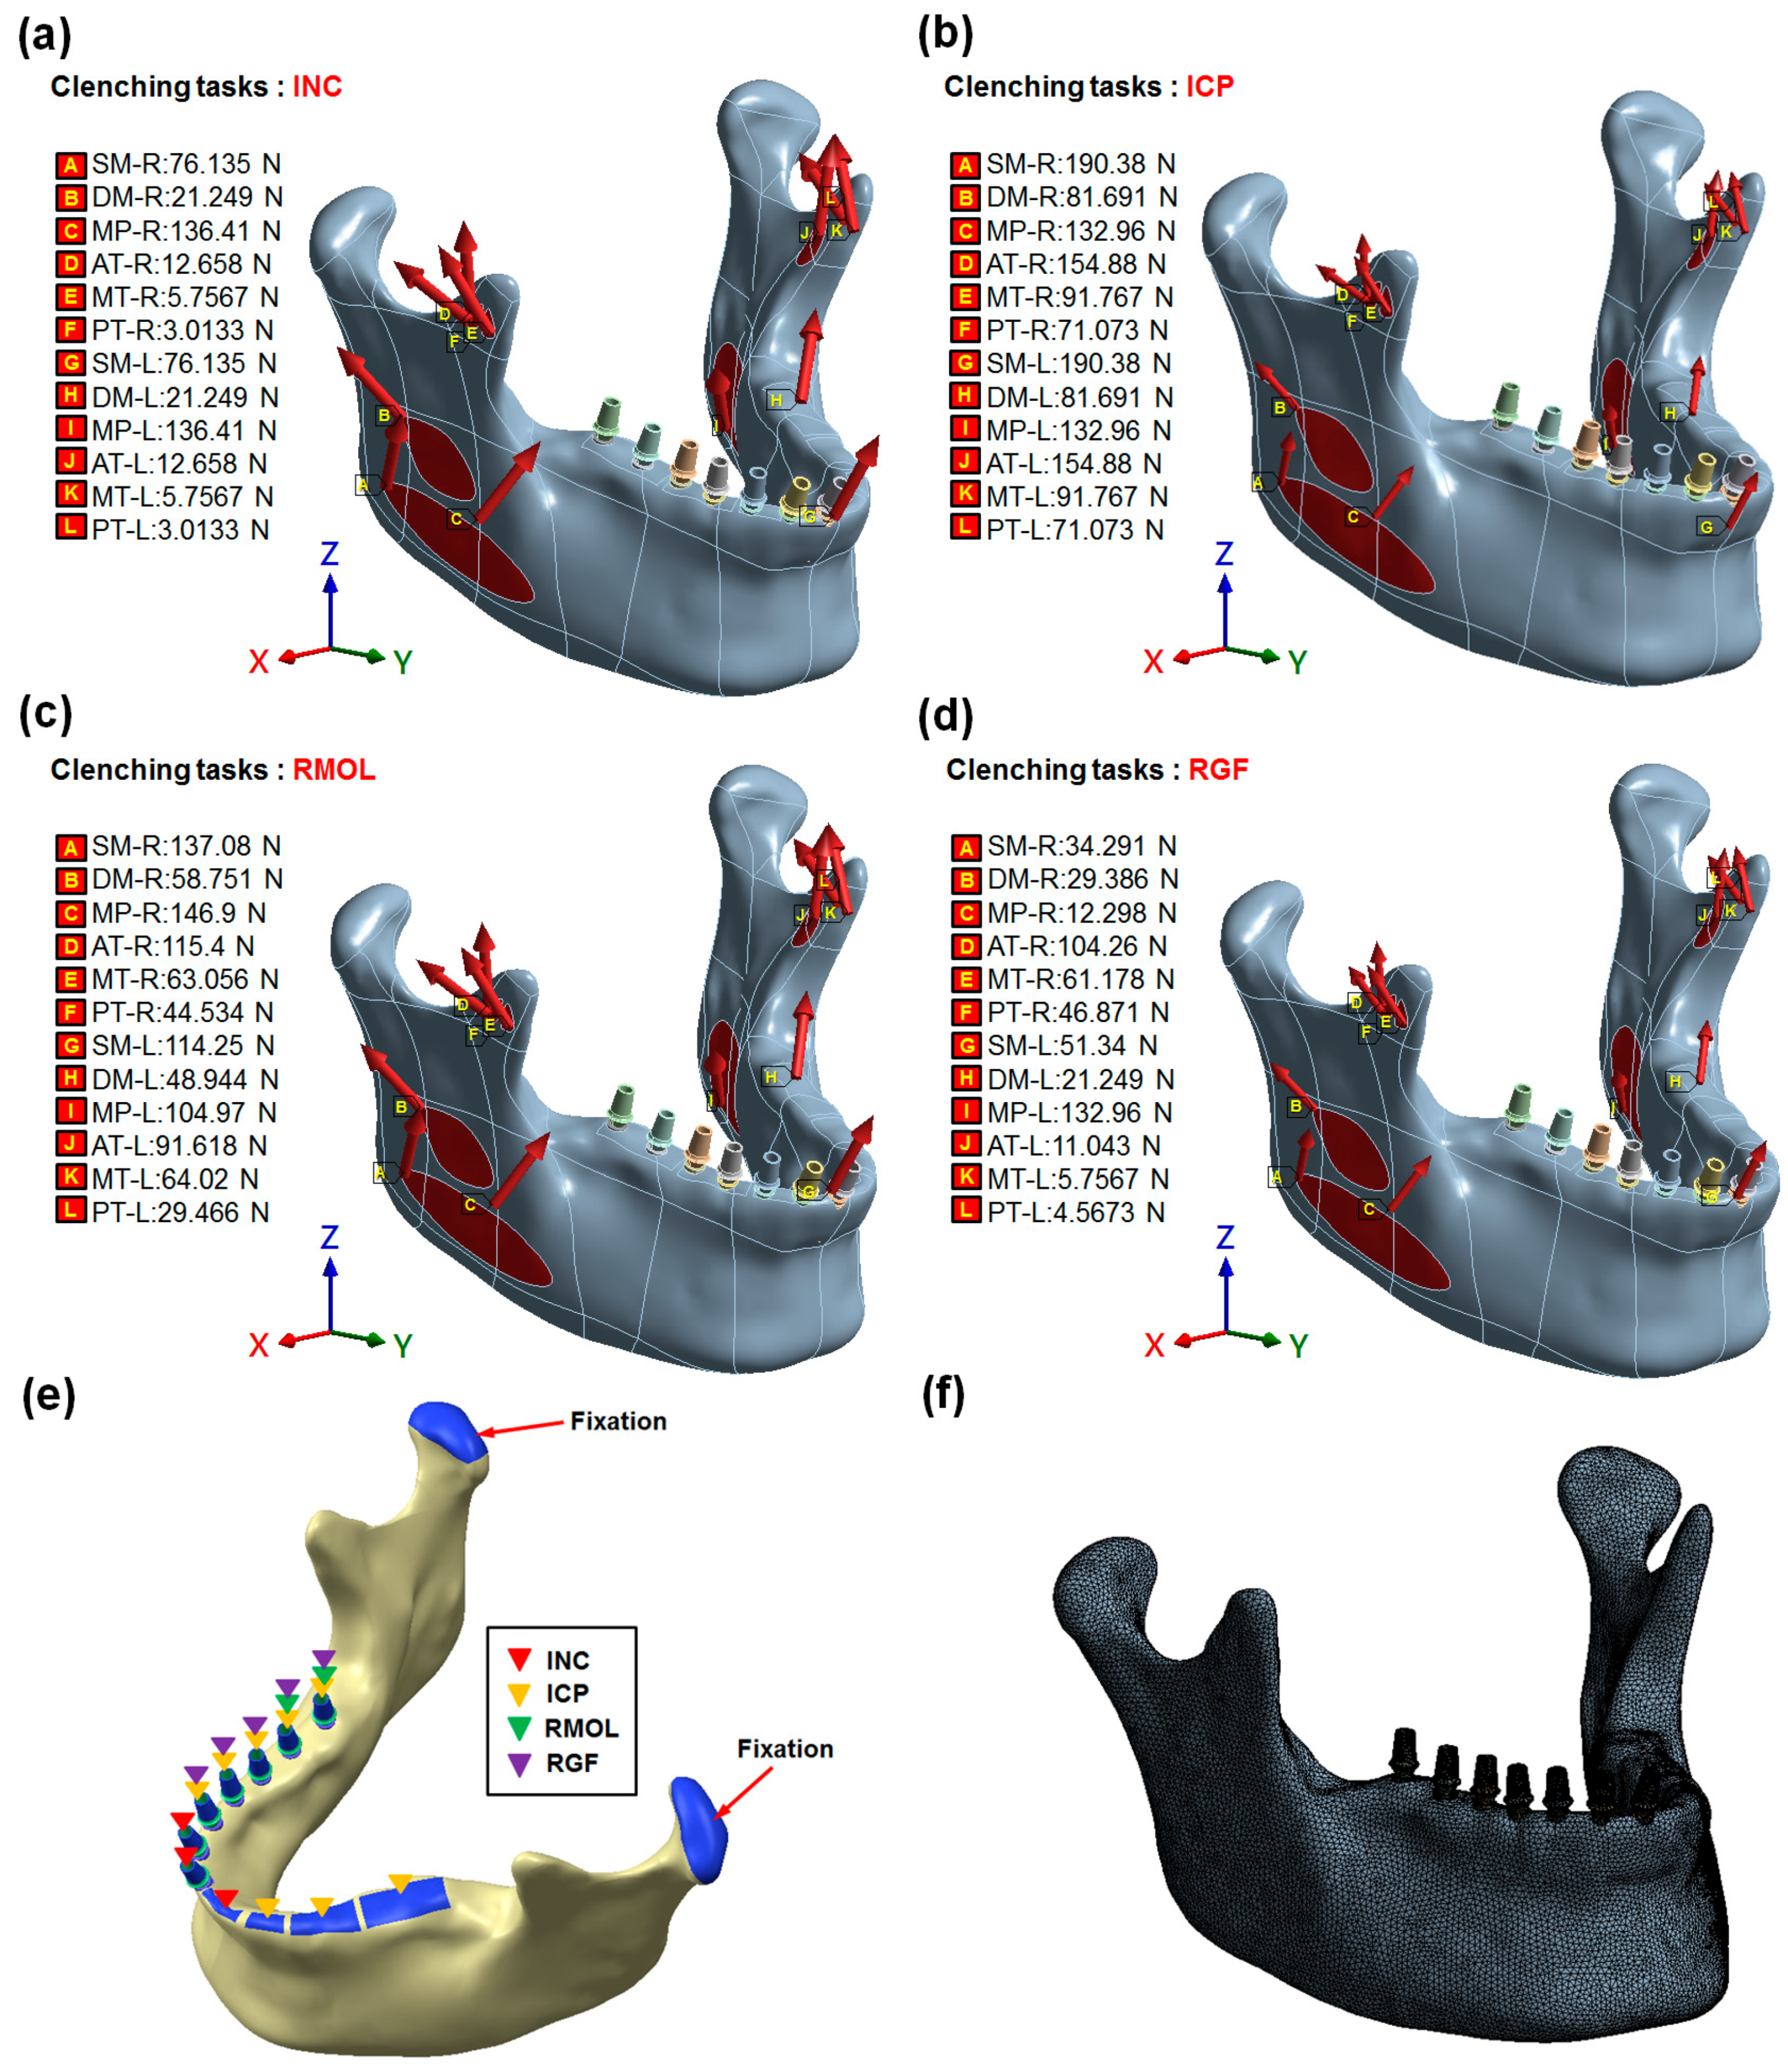 Applied Sciences Free Full Text Biomechanical Design Application On The Effect Of Different Occlusion Conditions On Dental Implants With Different Positions A Finite Element Analysis Html